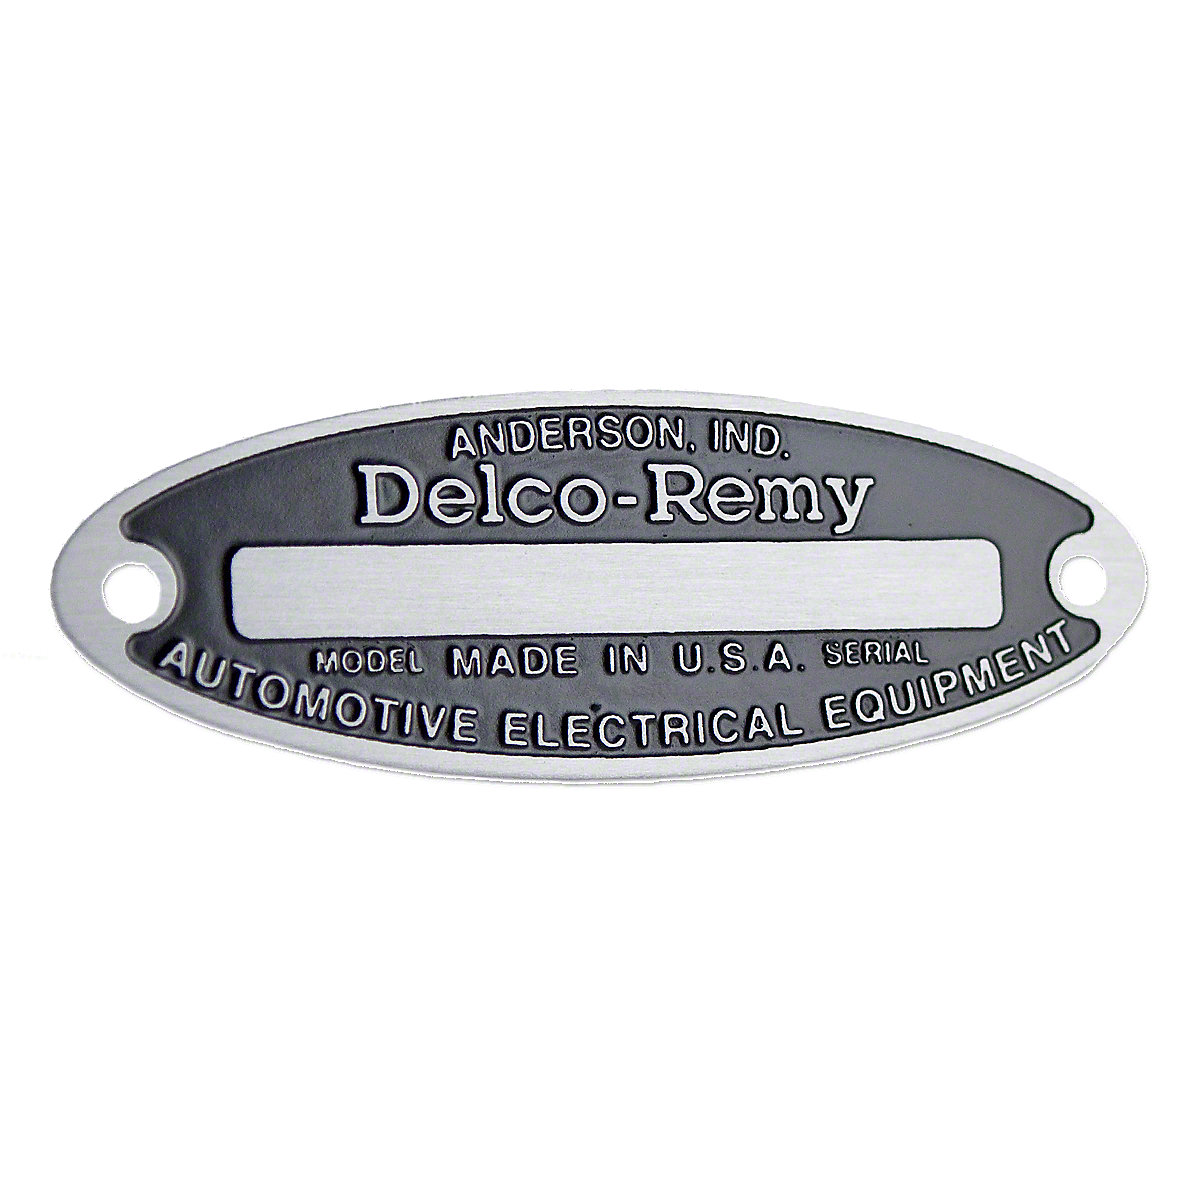 Blank Delco Remy Starter Tag For Massey Harris And Massey Ferguson Tractors.